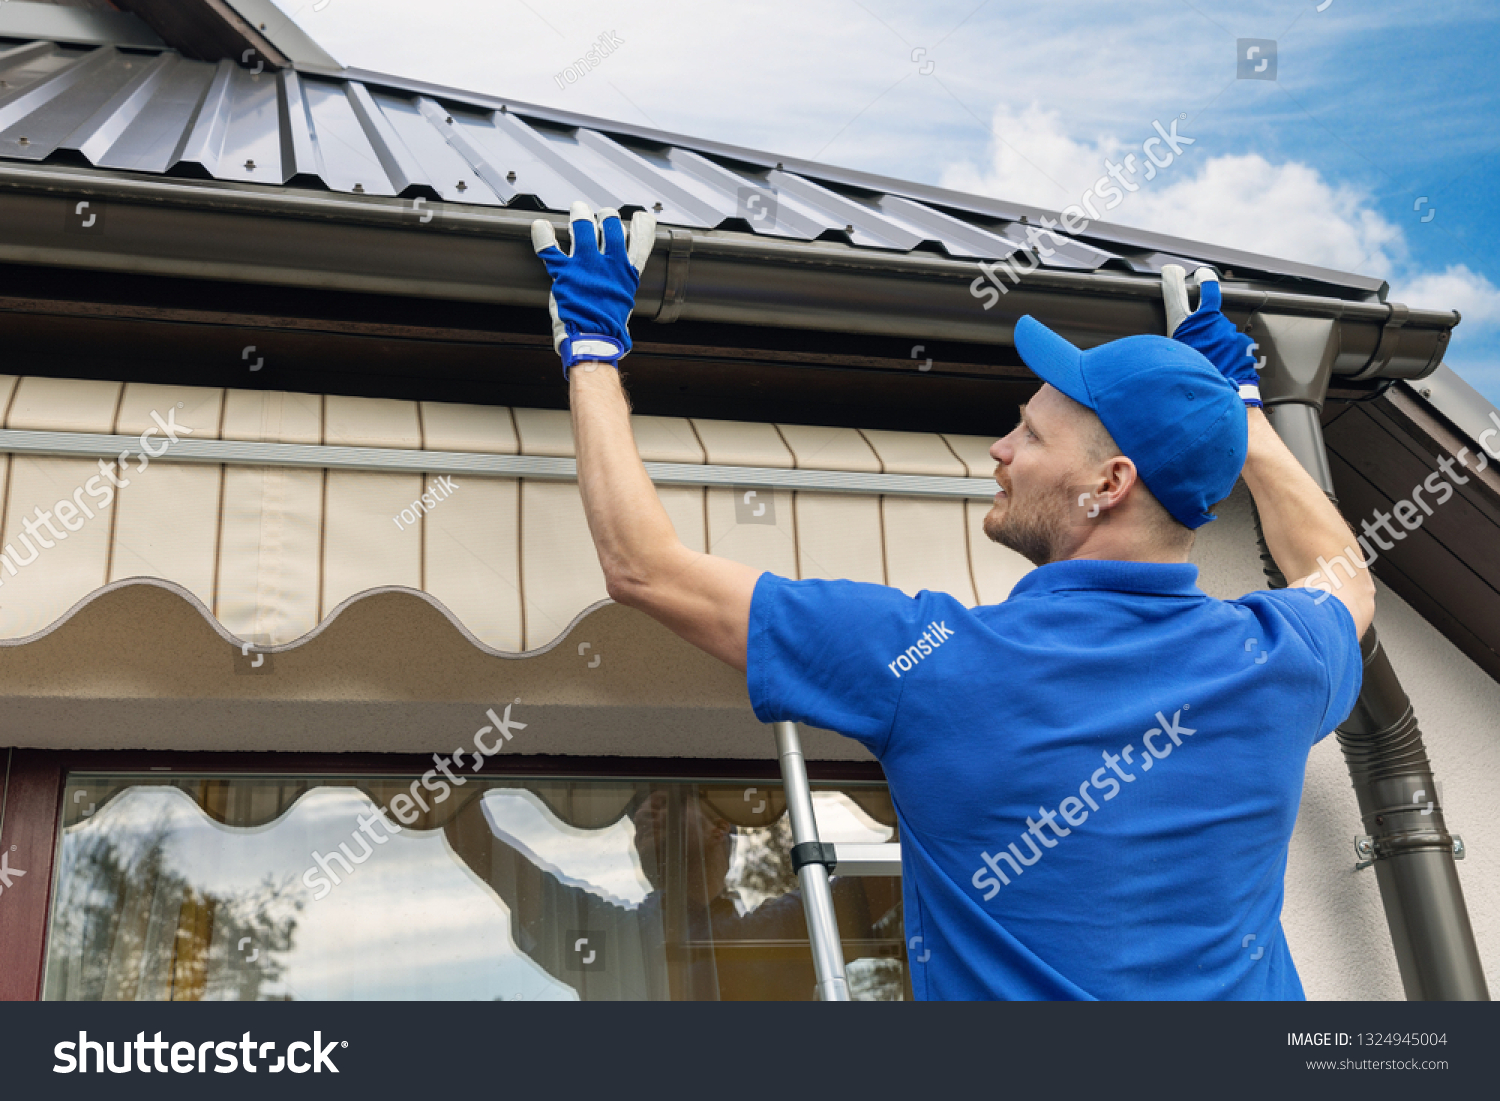 A man is standing on a ladder fixing a gutter on the roof of a house.